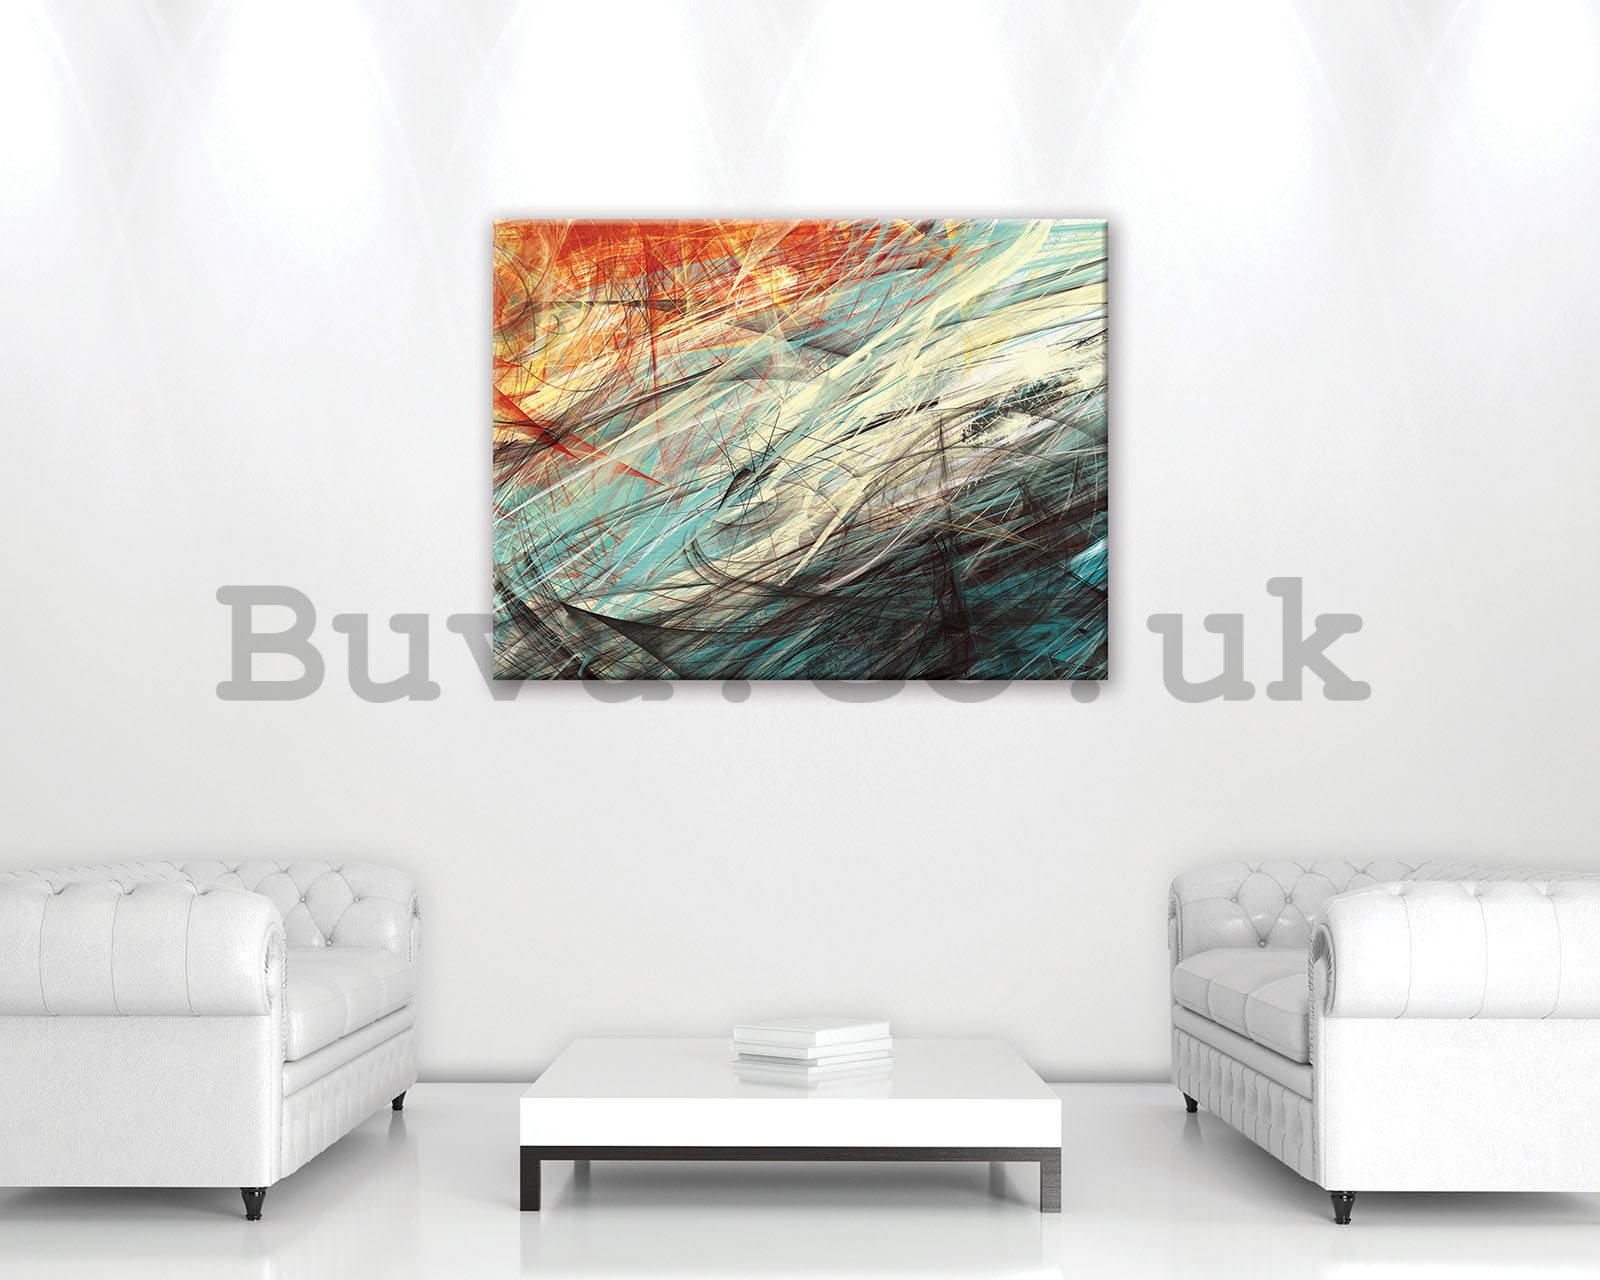 Painting on canvas: Modern Abstraction (1) - 80x60 cm